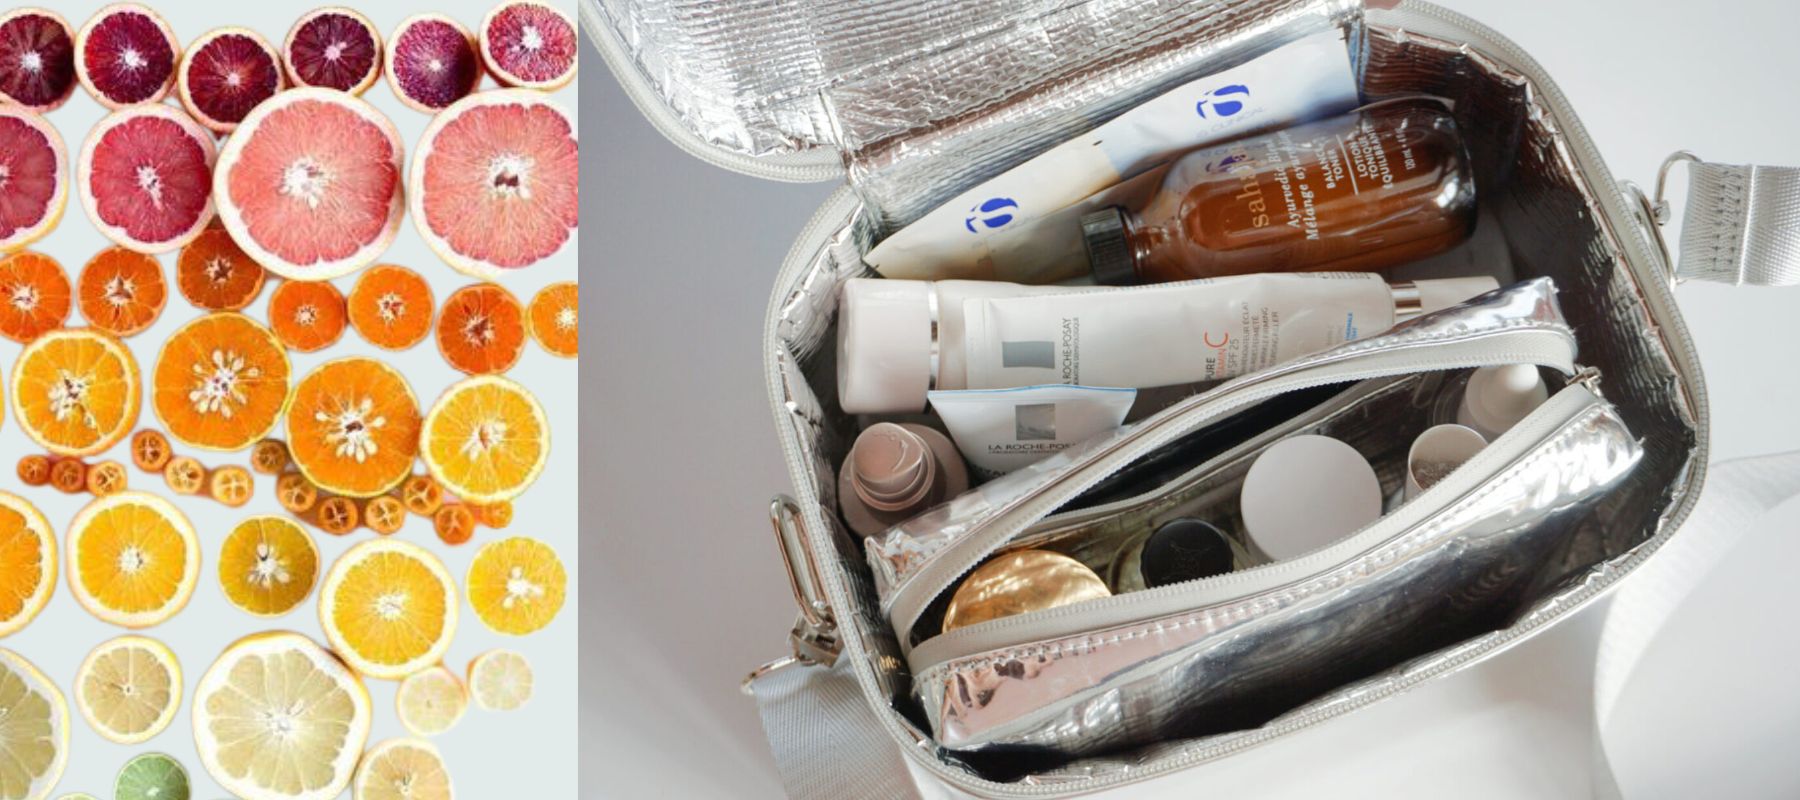 Vitamin C: How to Protect Your Beauty Investment